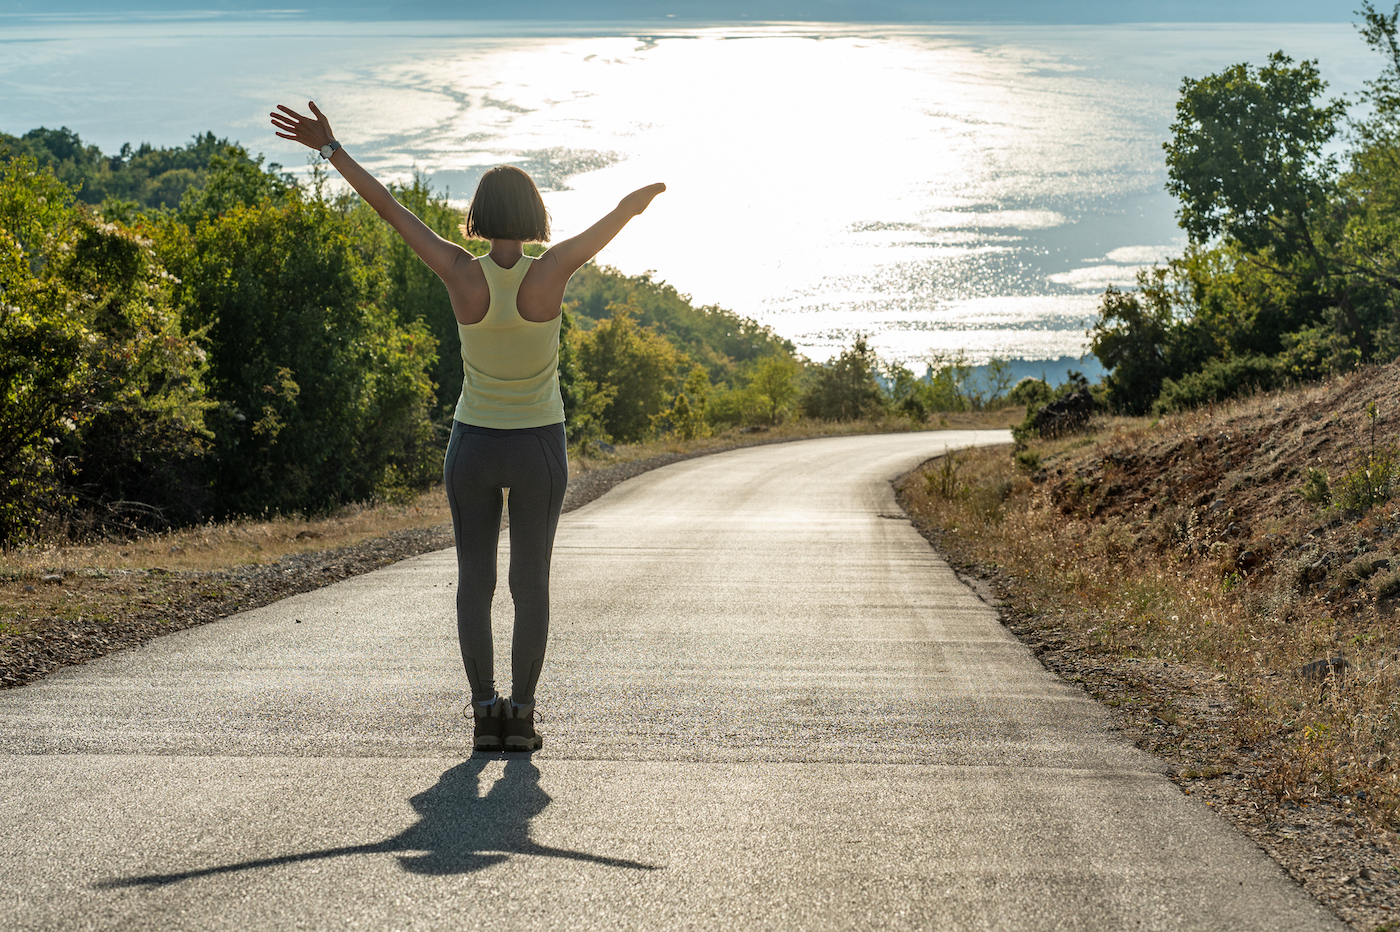 Happy woman with outstretched arms on a road overlooking a lake, representing how GoTo Resolve wins over the competition